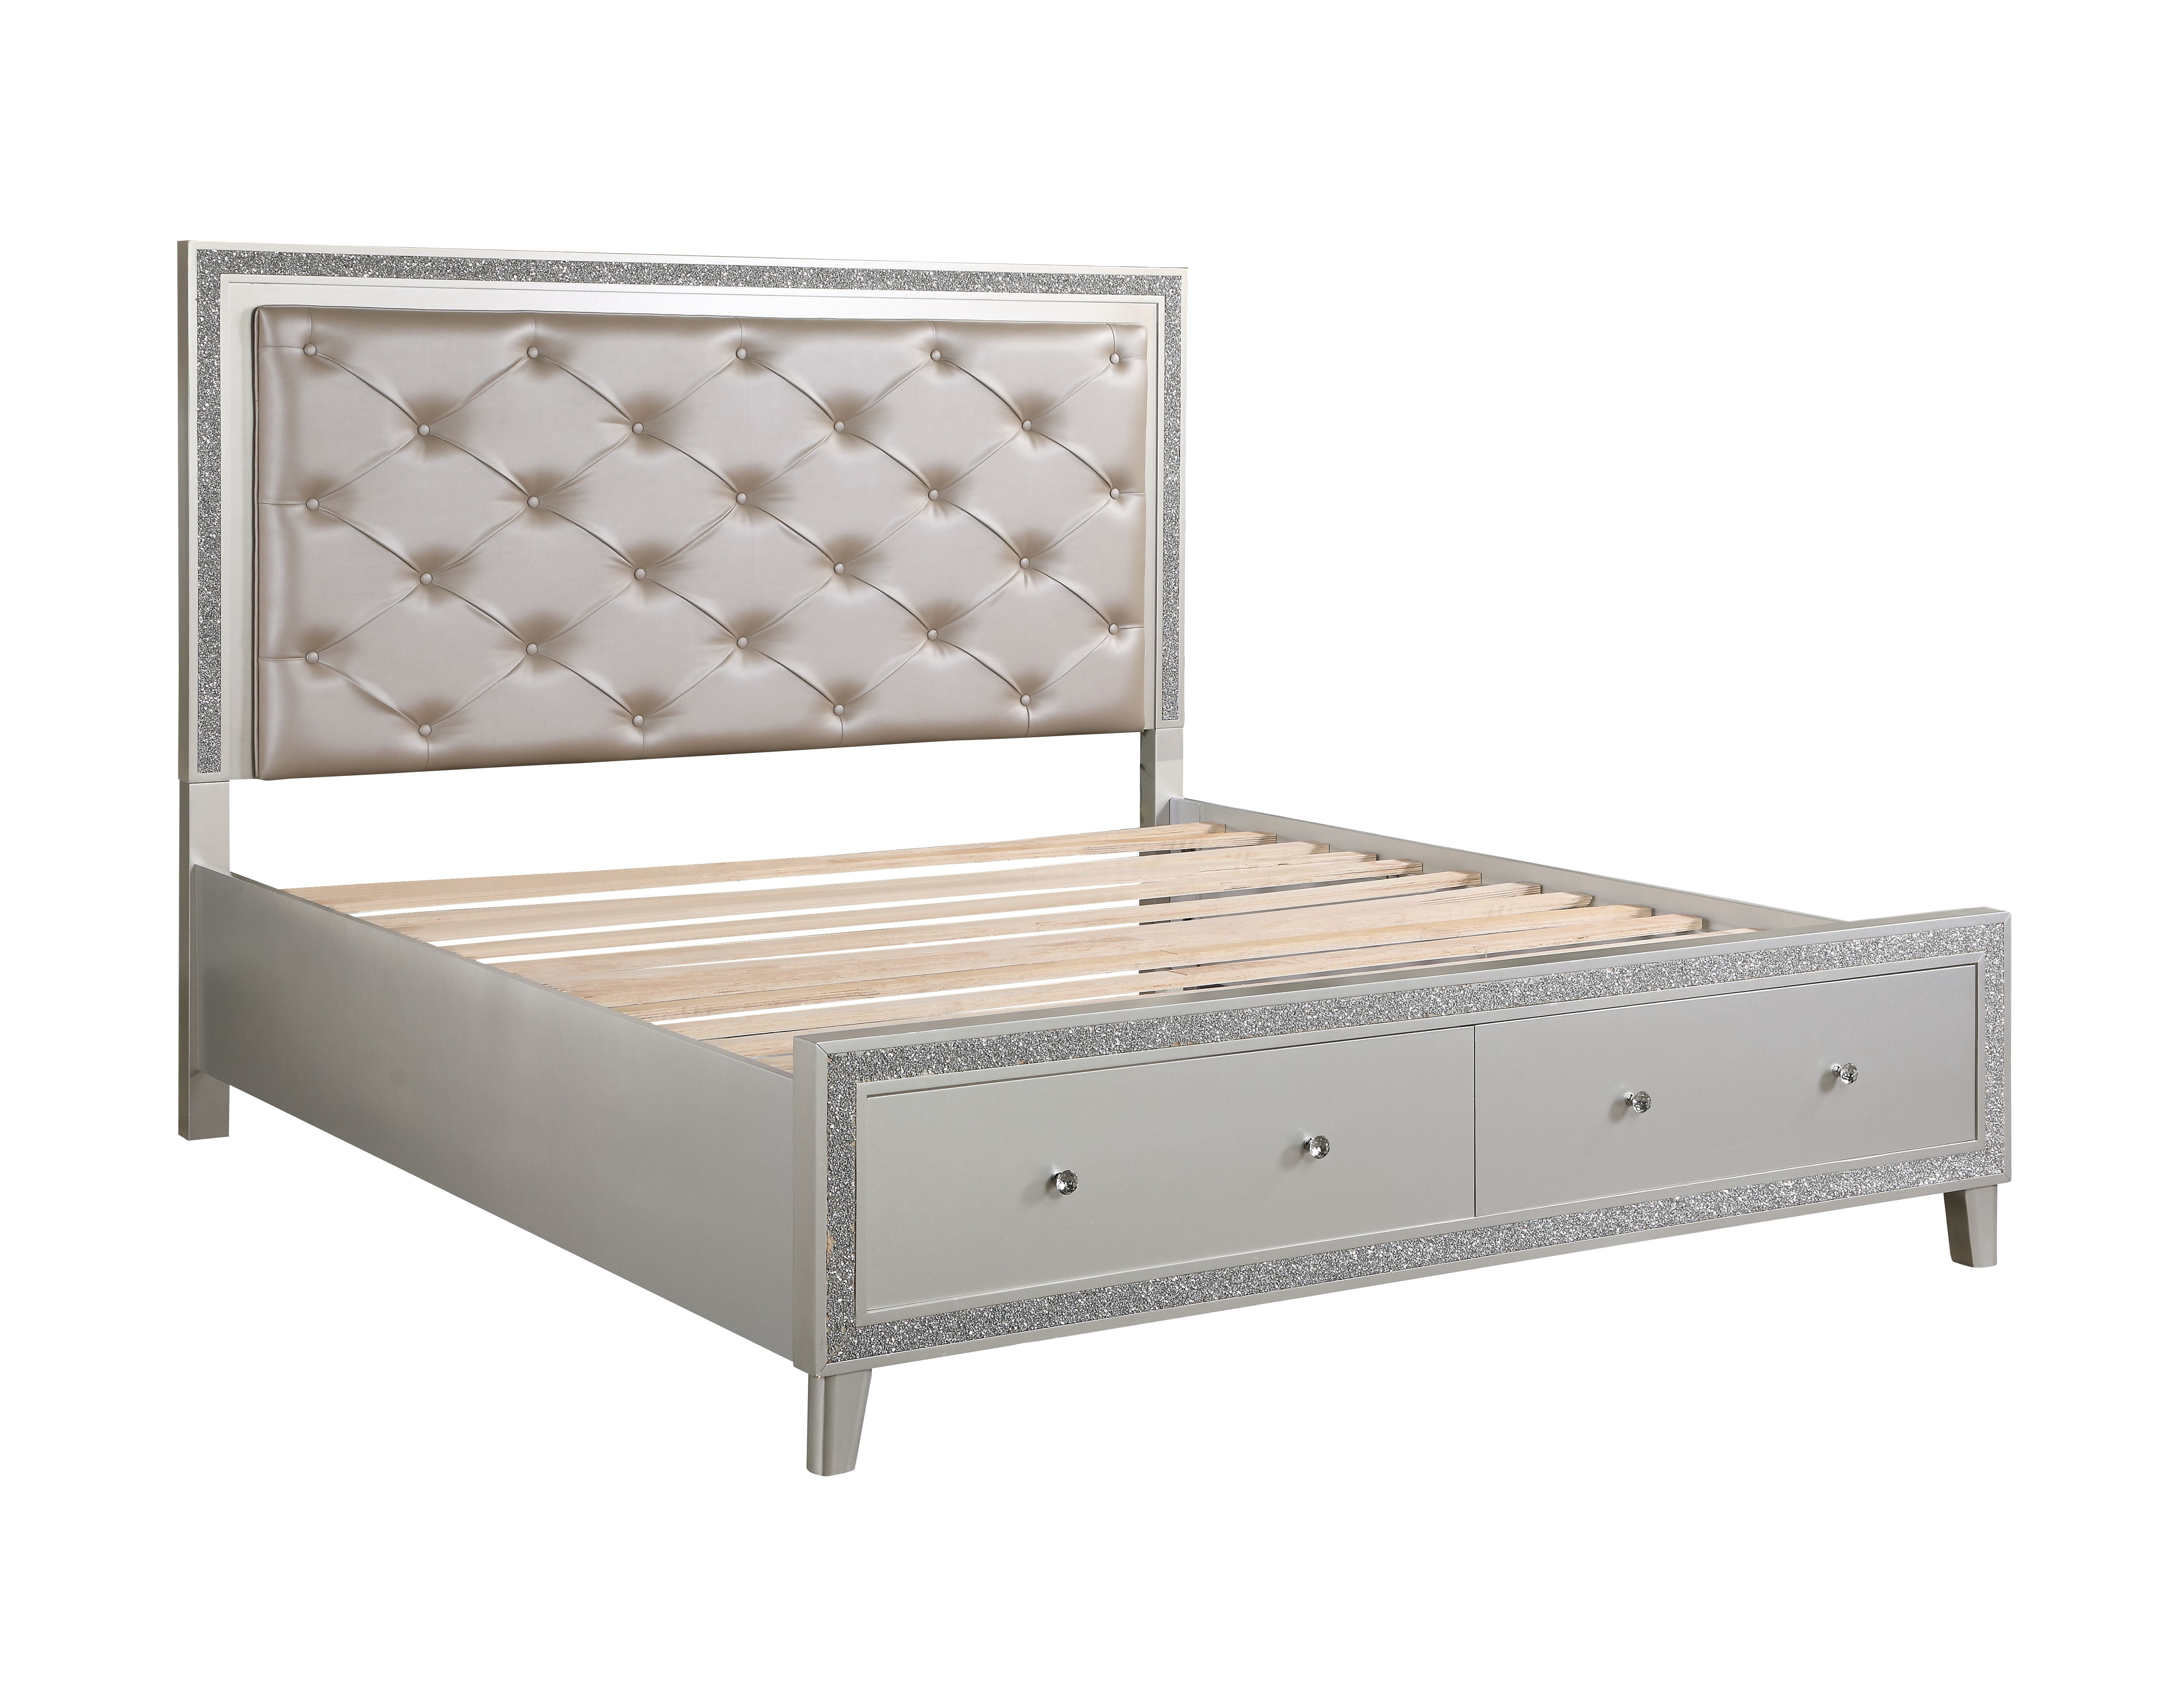 Sliverfluff California King Bed In Pu, Champagne King Bed